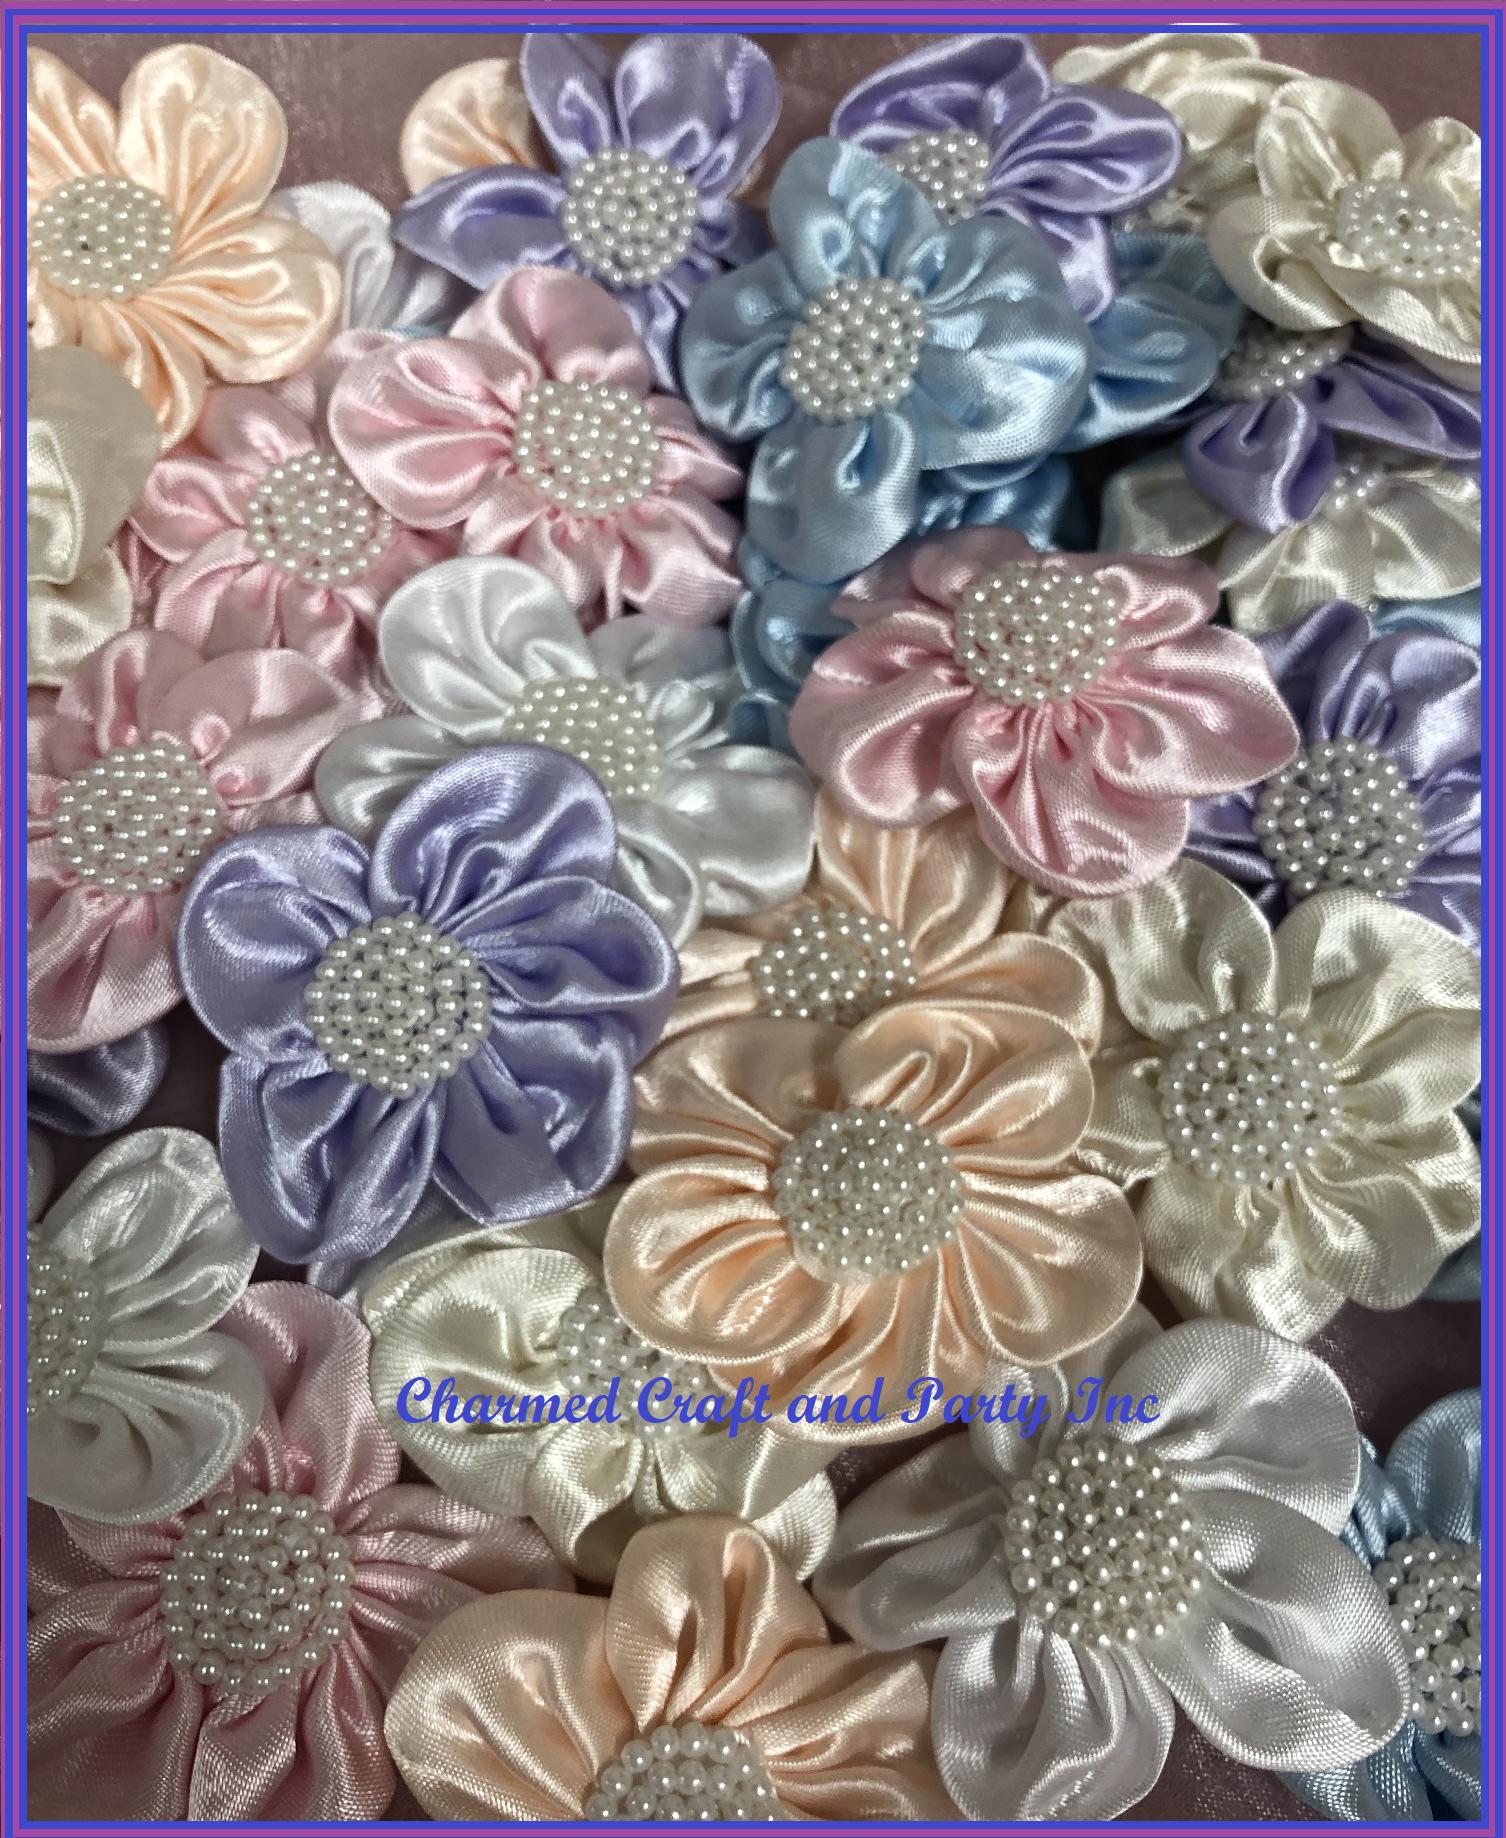 CHARMED 2 1/4" Satin W/ Pearls Flowers Arts Crafts DIY Applique 50 pieces - image 1 of 3